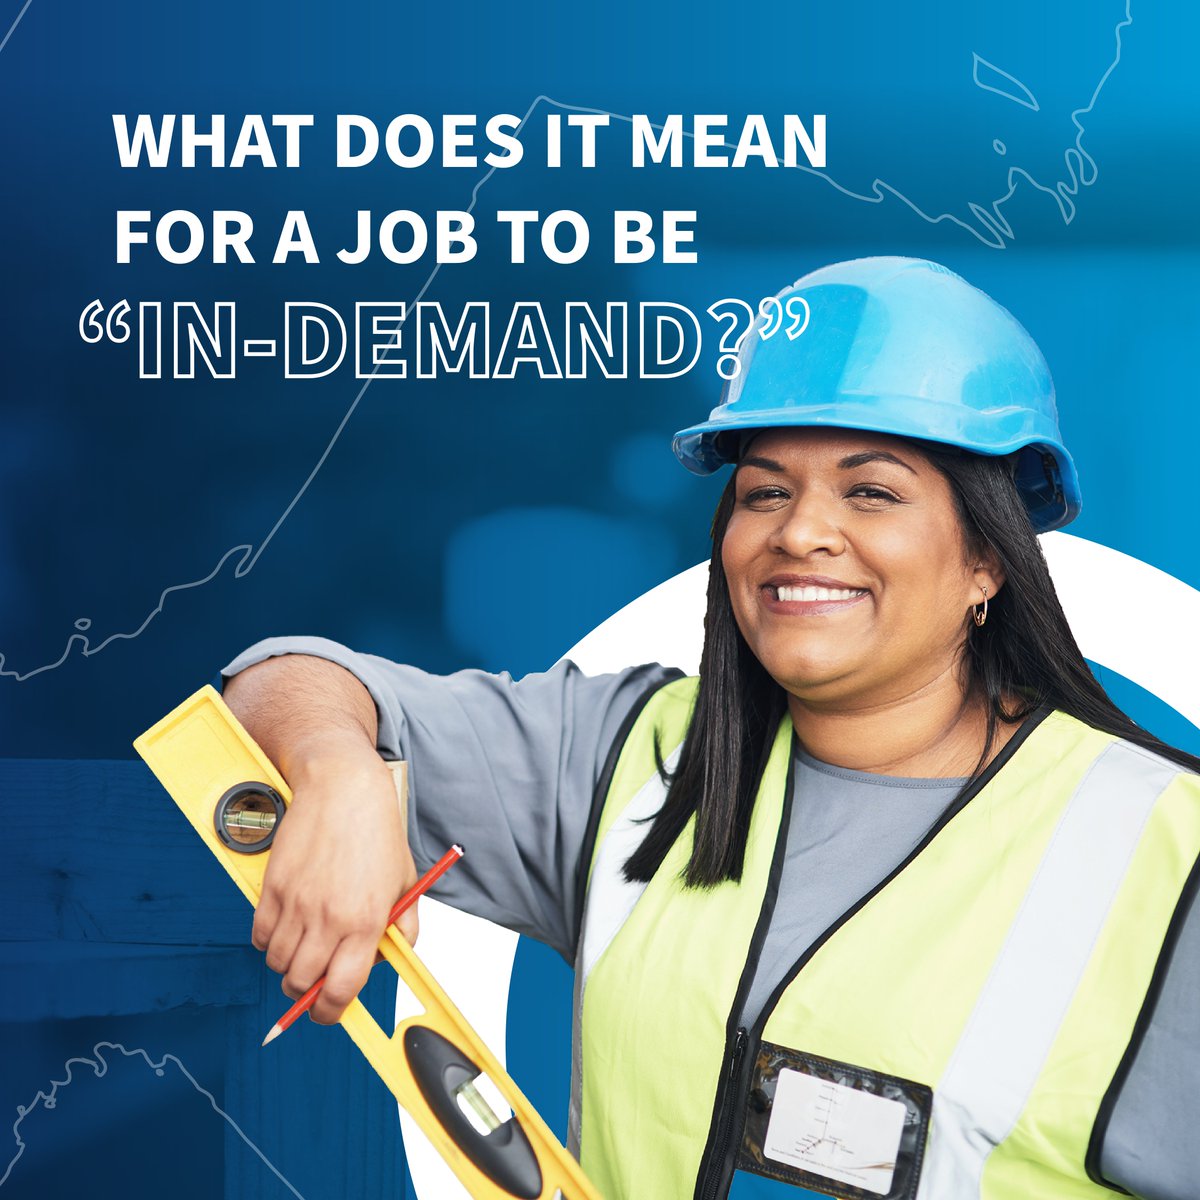 What does it mean for a job to be “in-demand”? An in-demand job is a job in a field that has a high demand for workers. Visit OhioMeansJobs.com to search for work in in-demand fields such as manufacturing, construction, and healthcare today. #OhioMeansJobs #InDemandJobs